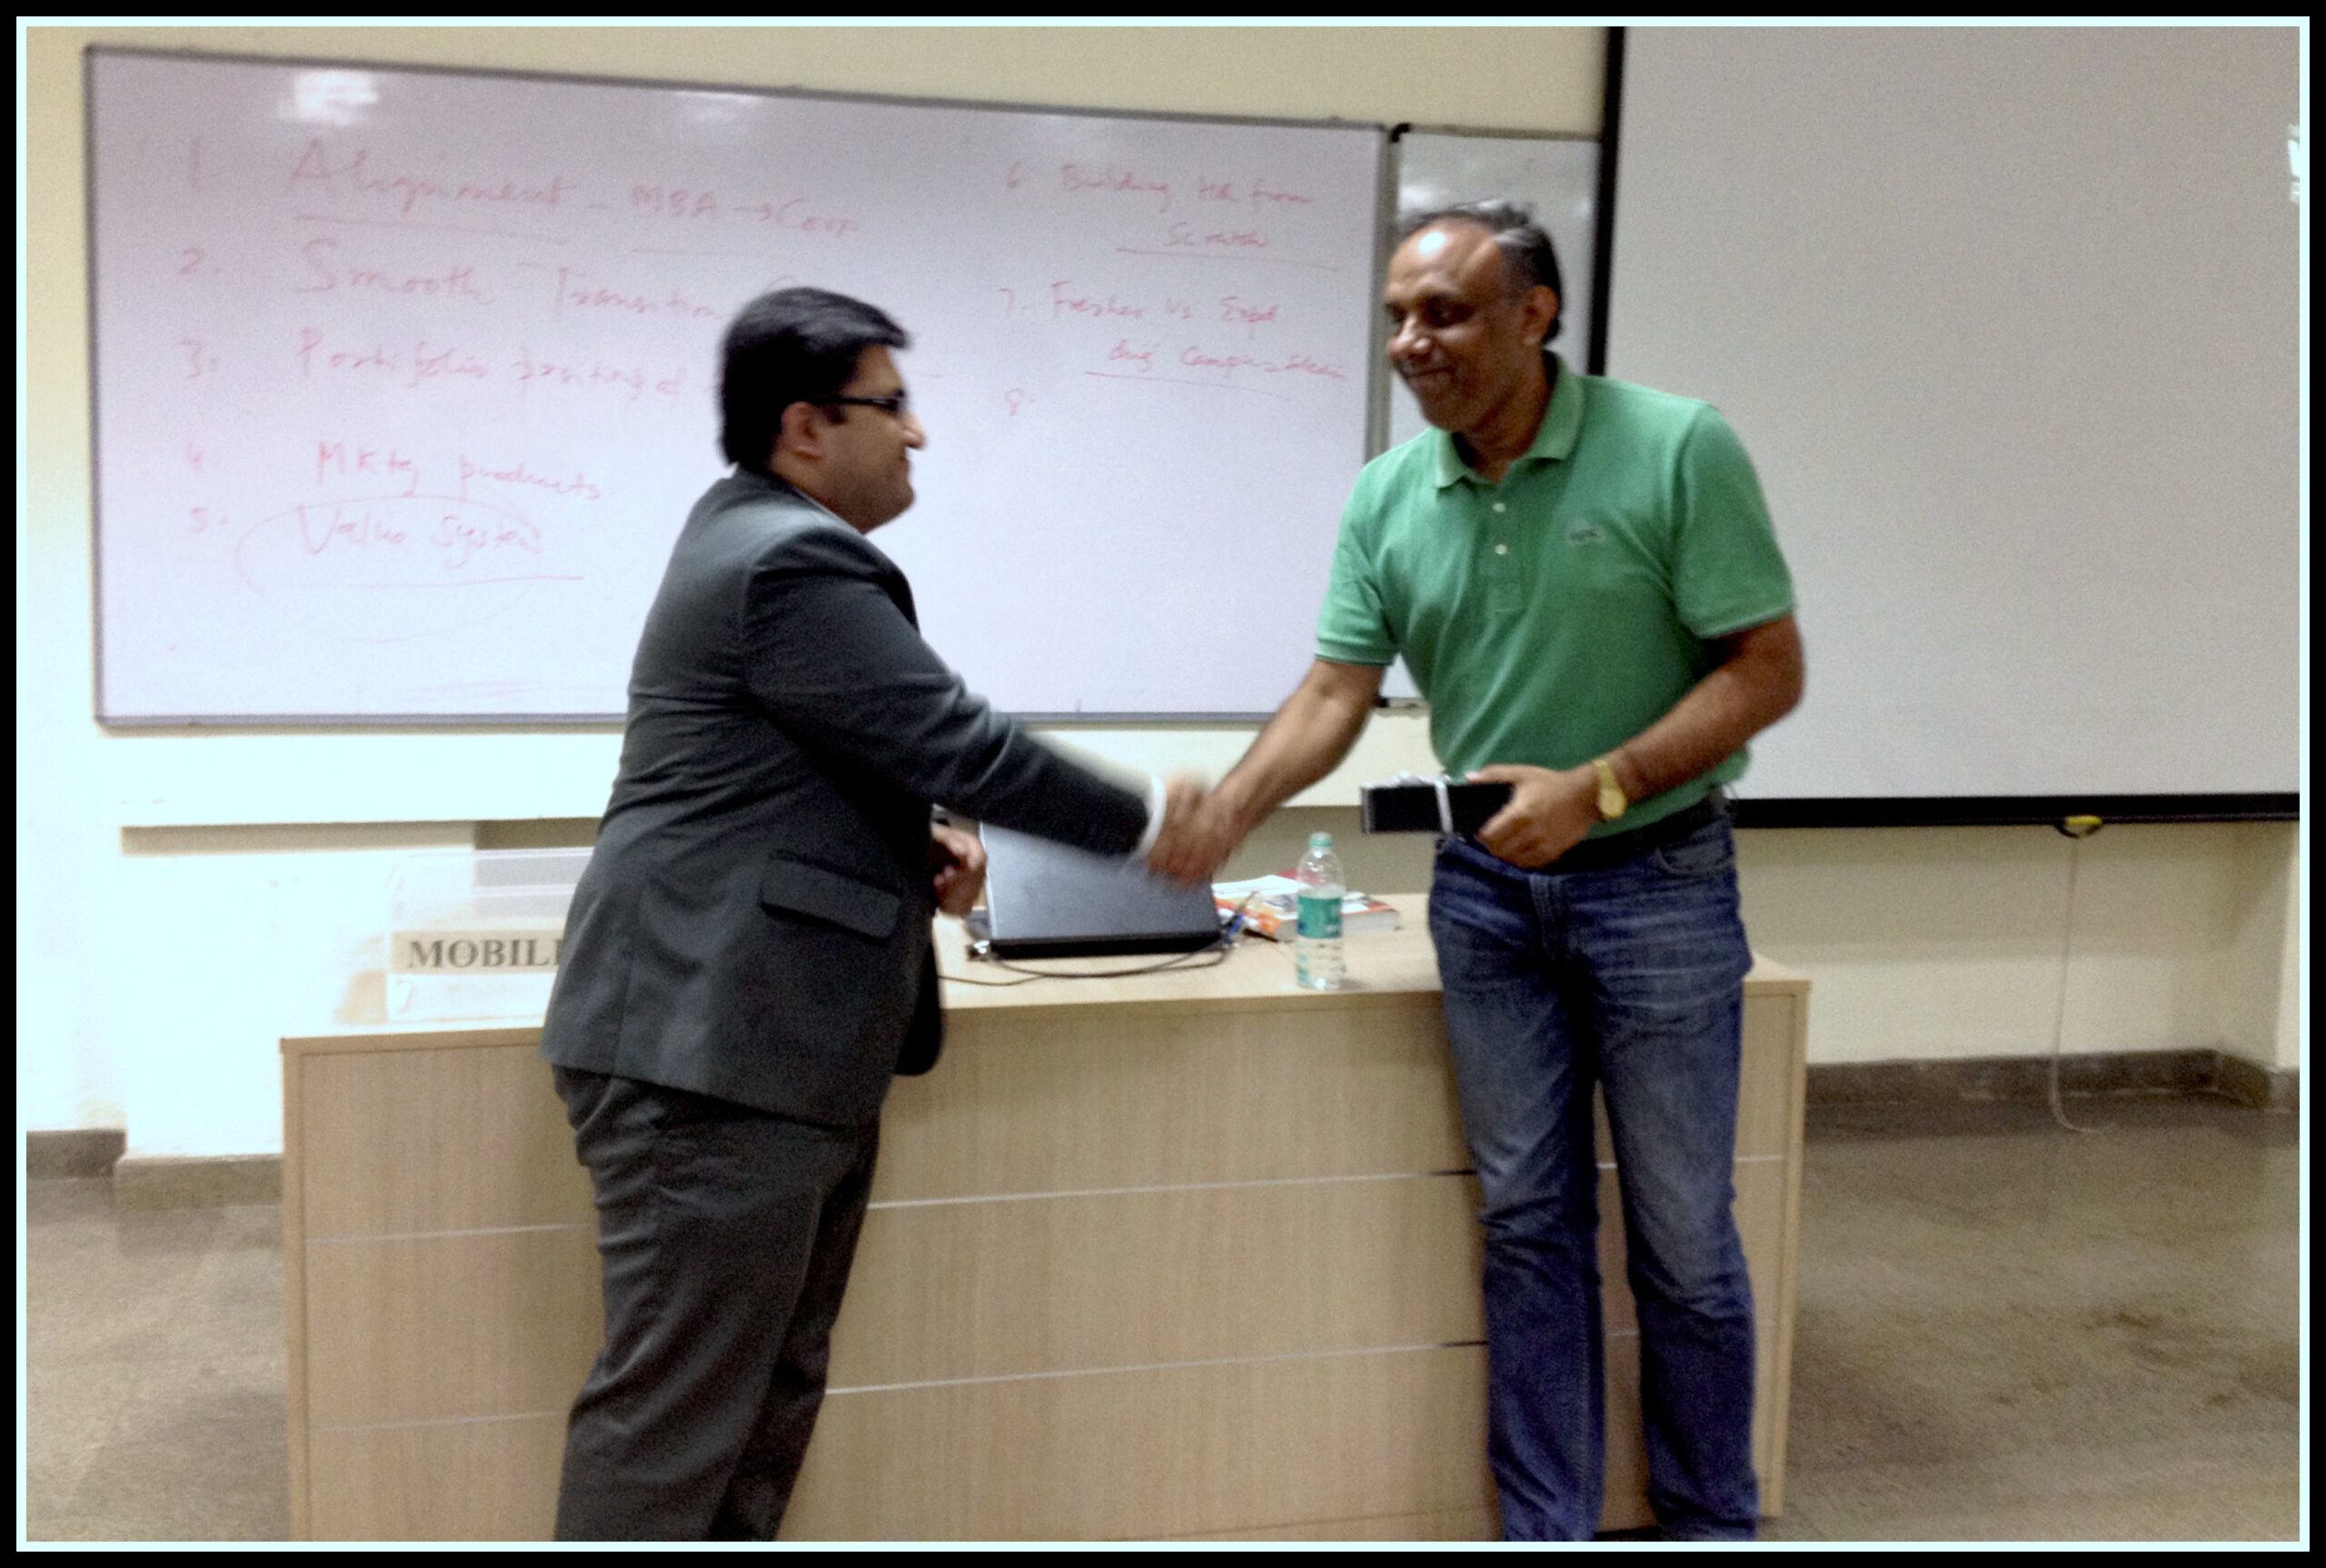 Guest Lecture by Mr. Sanjeev Dixit – Chief People Officer at Allied Blenders & Distillers Pvt. Ltd.